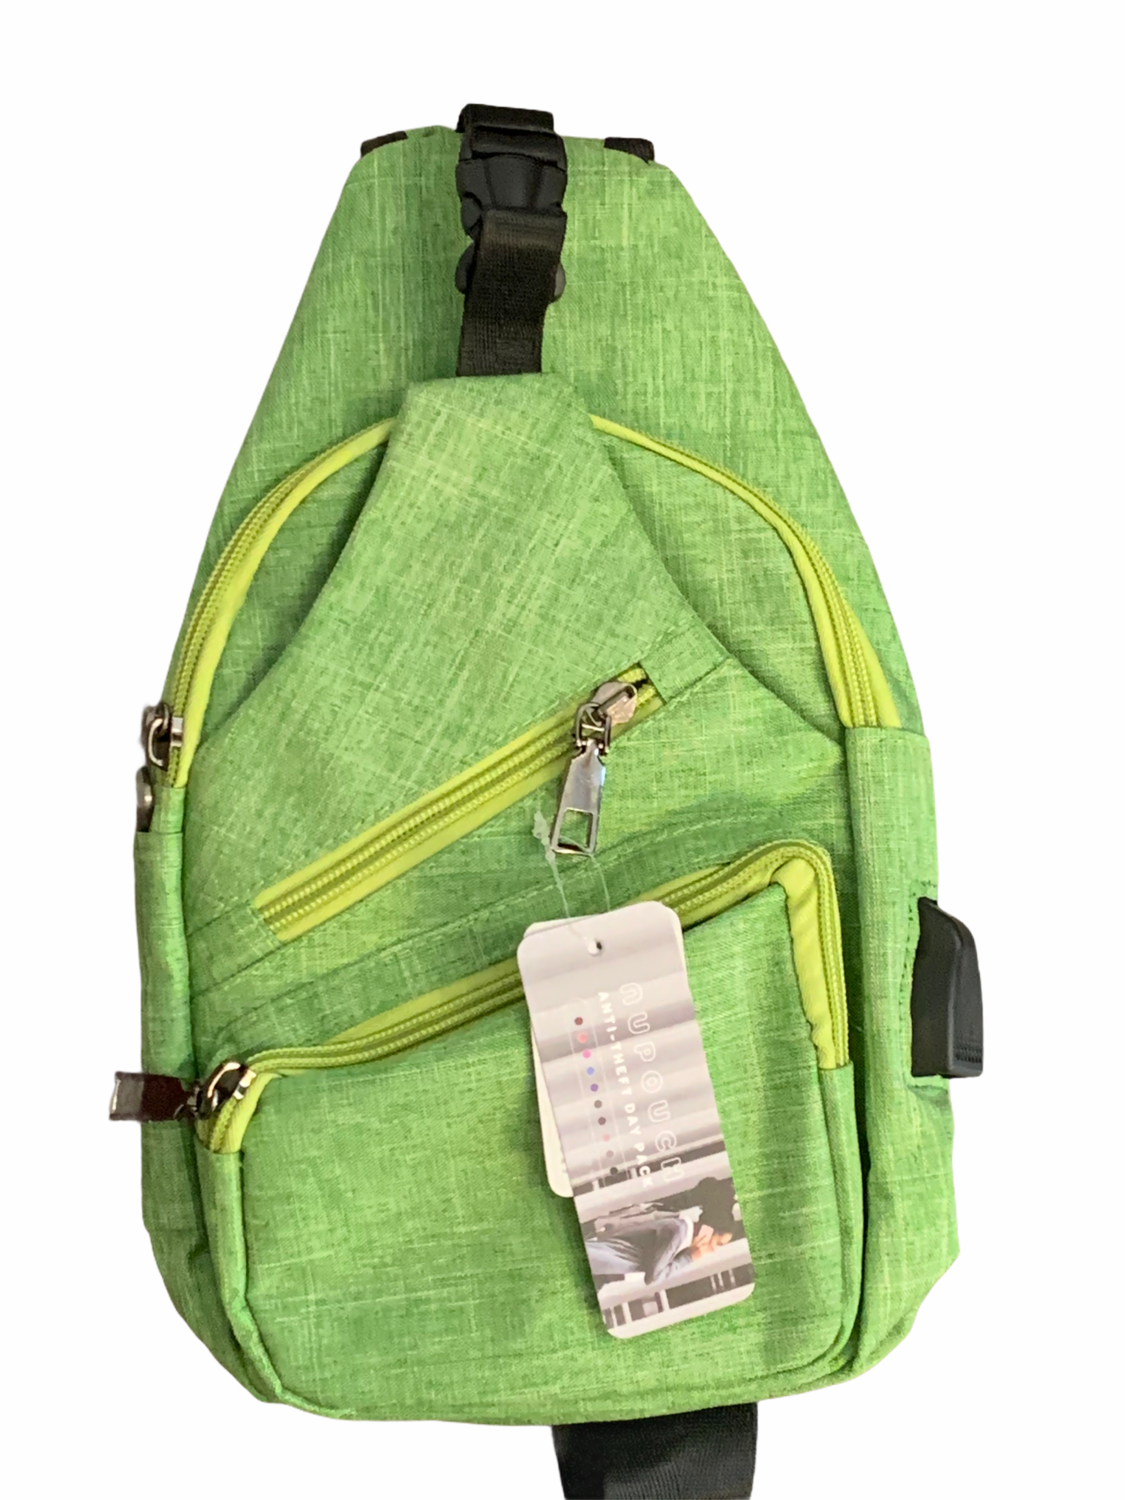 P&L- Tahoe Day Pack Sling